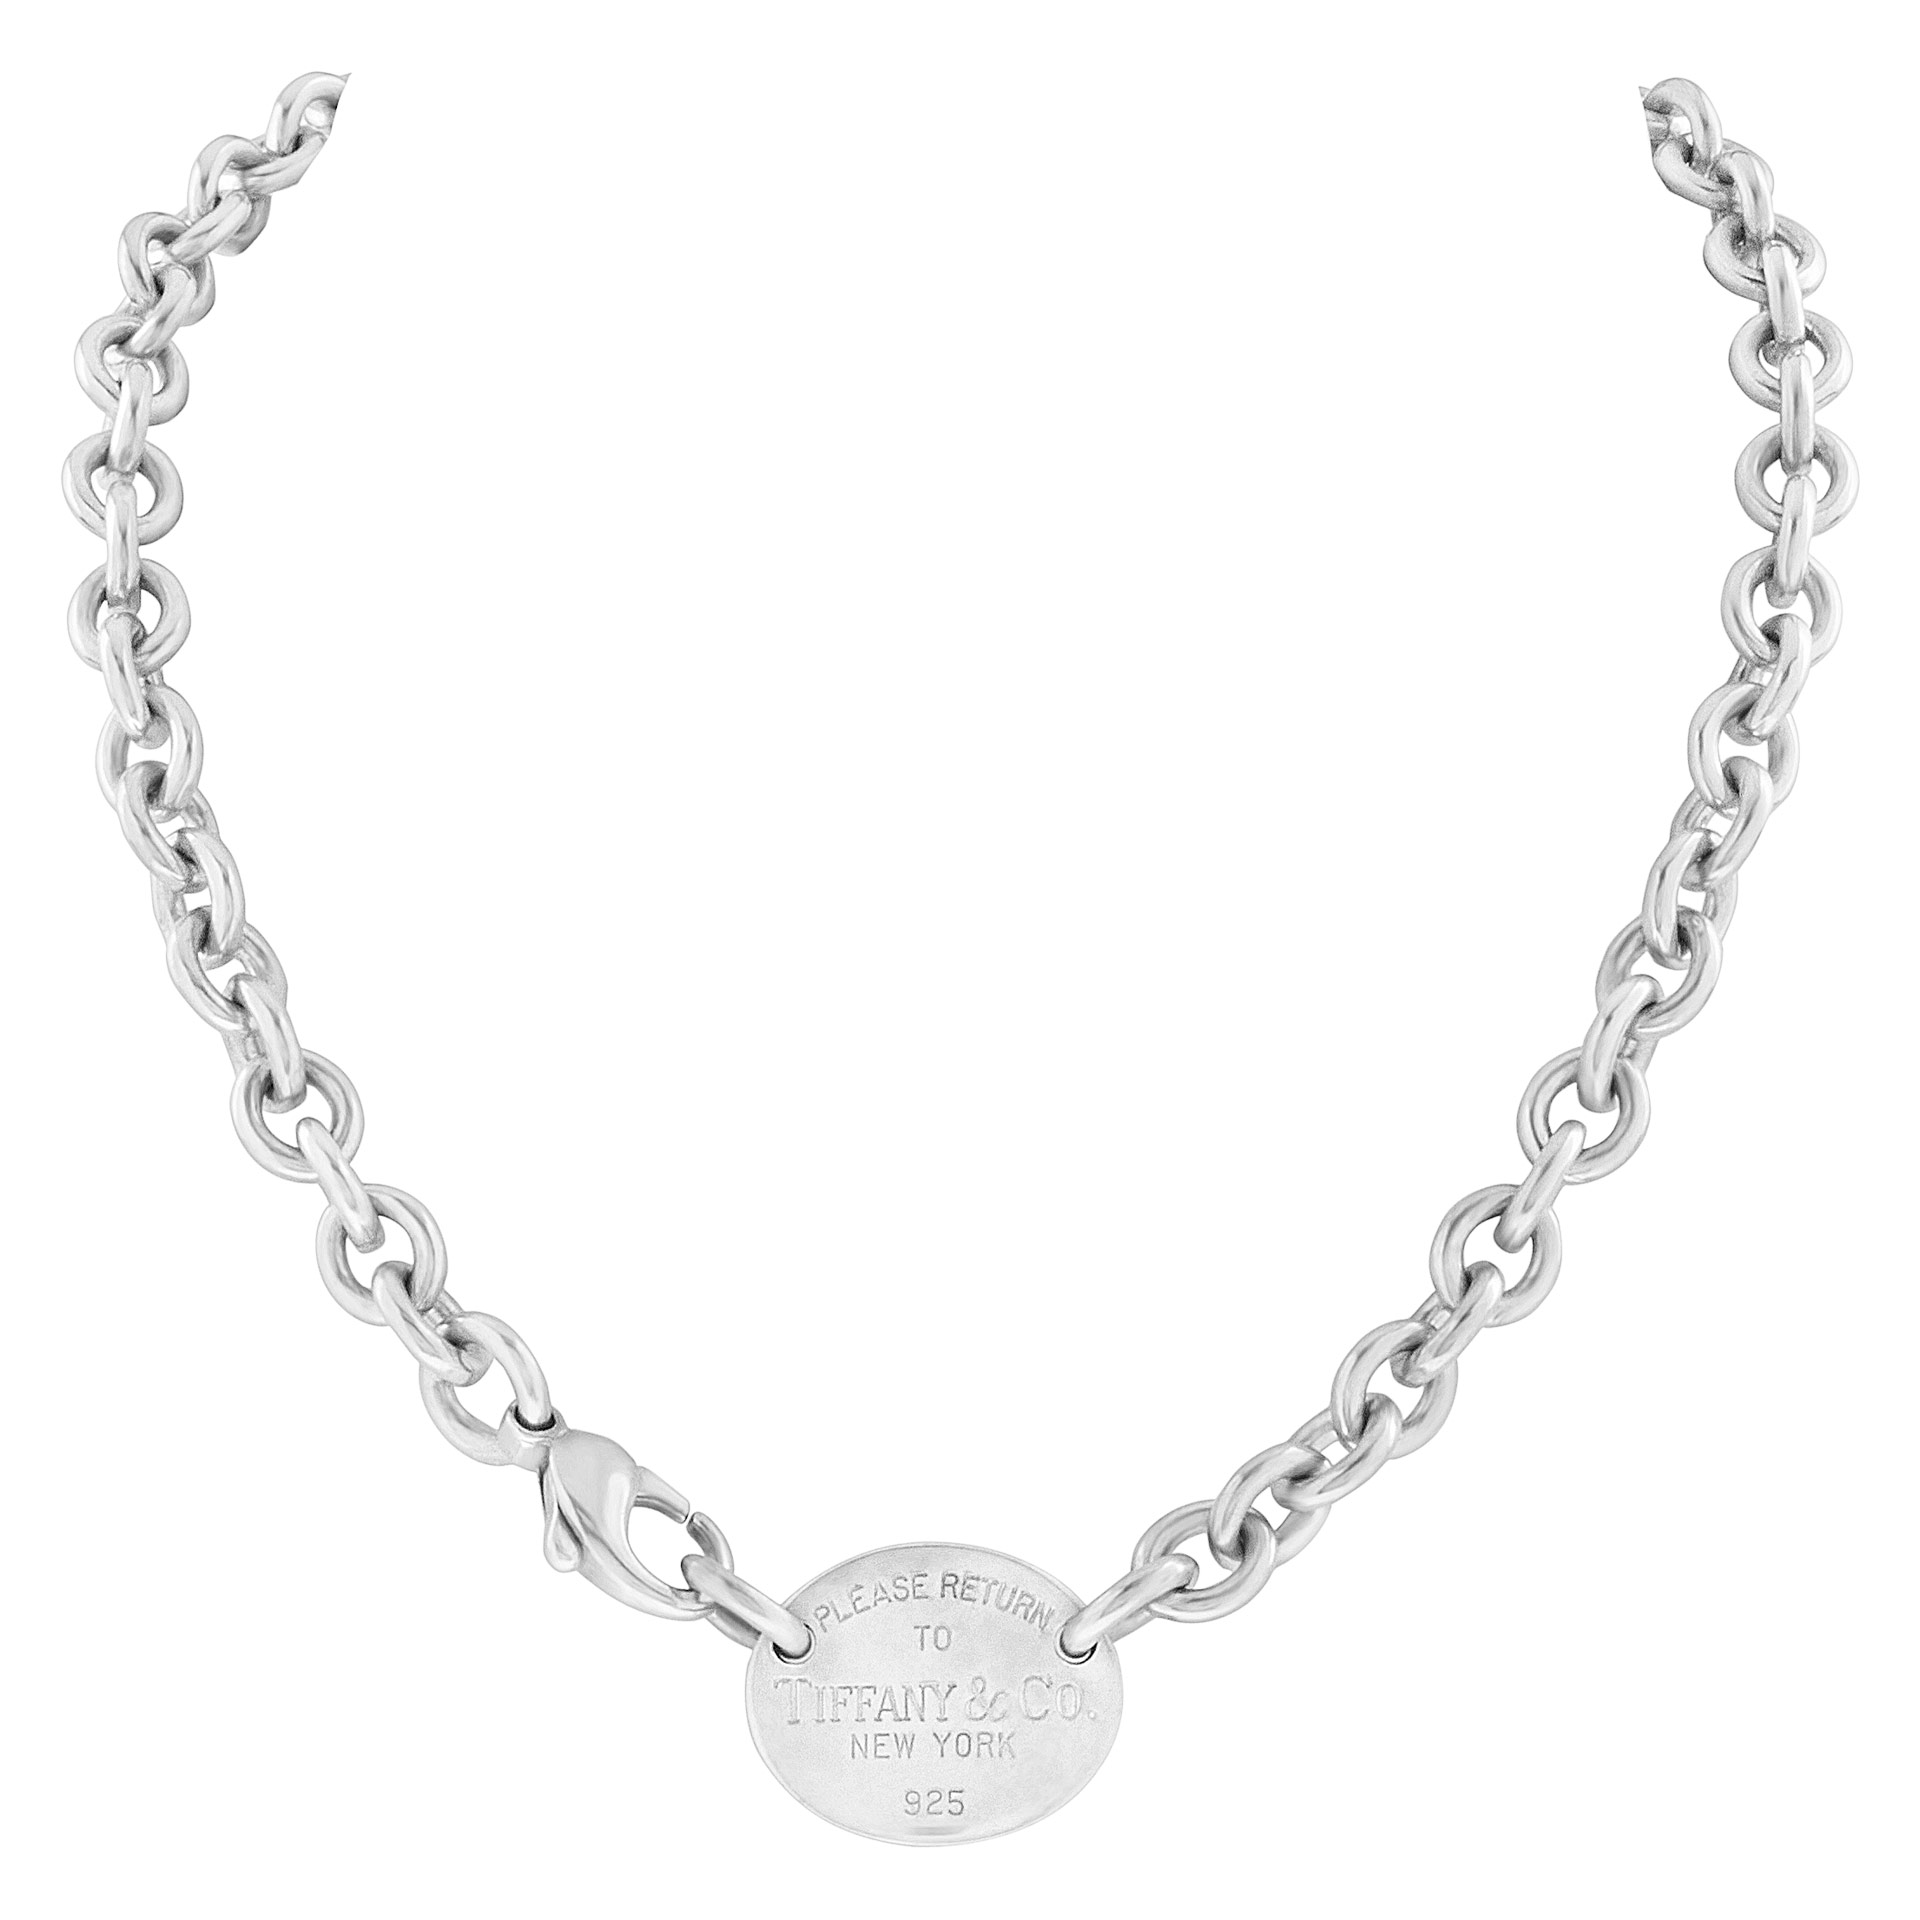 Tiffany & Co silver necklace image 1